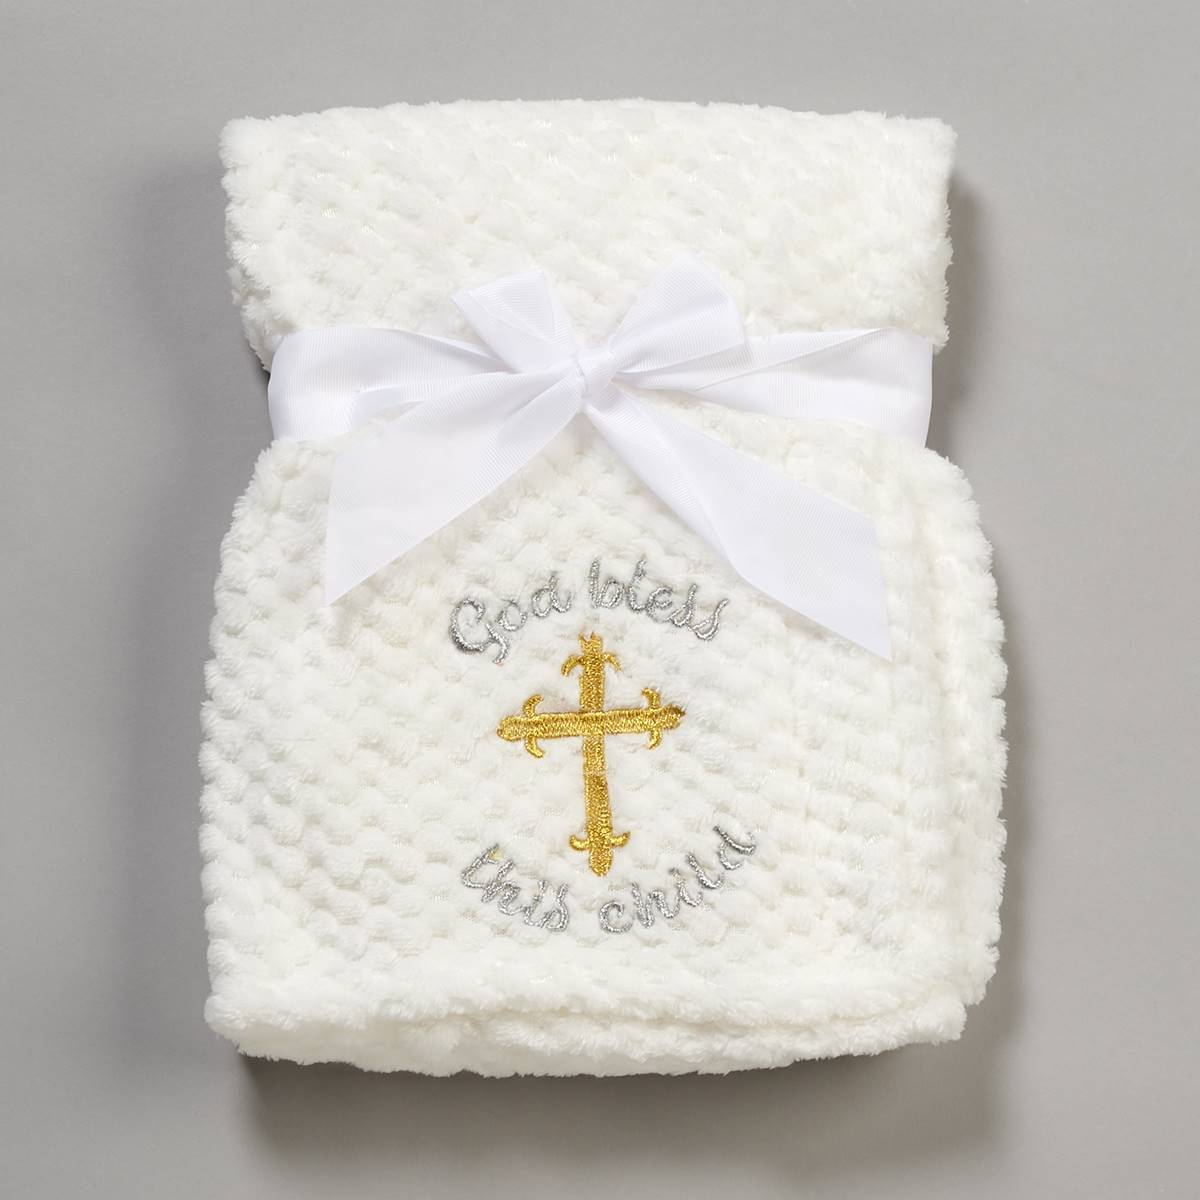 Heavenly Sent Bless This Child Applique Baby Blanket